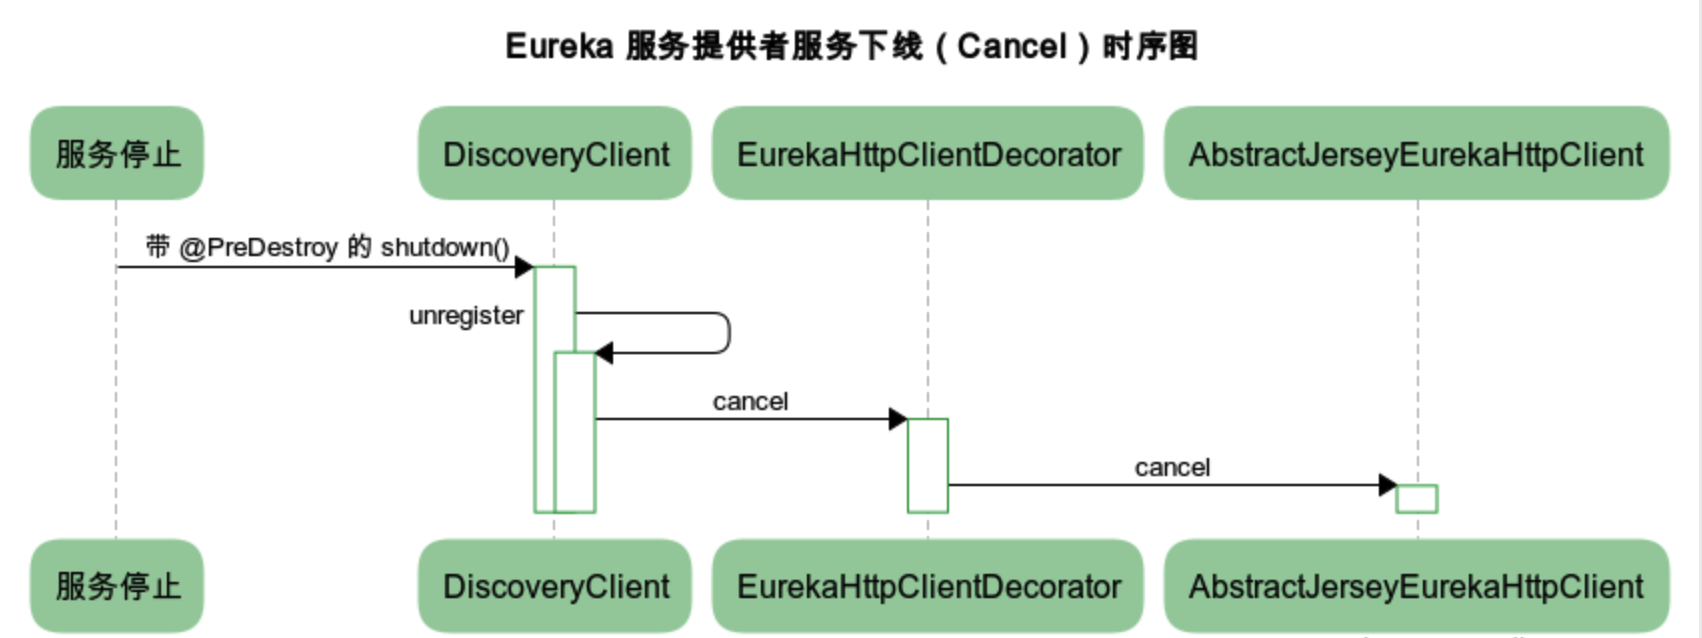 service-provider-cancel-sequence-chart.png